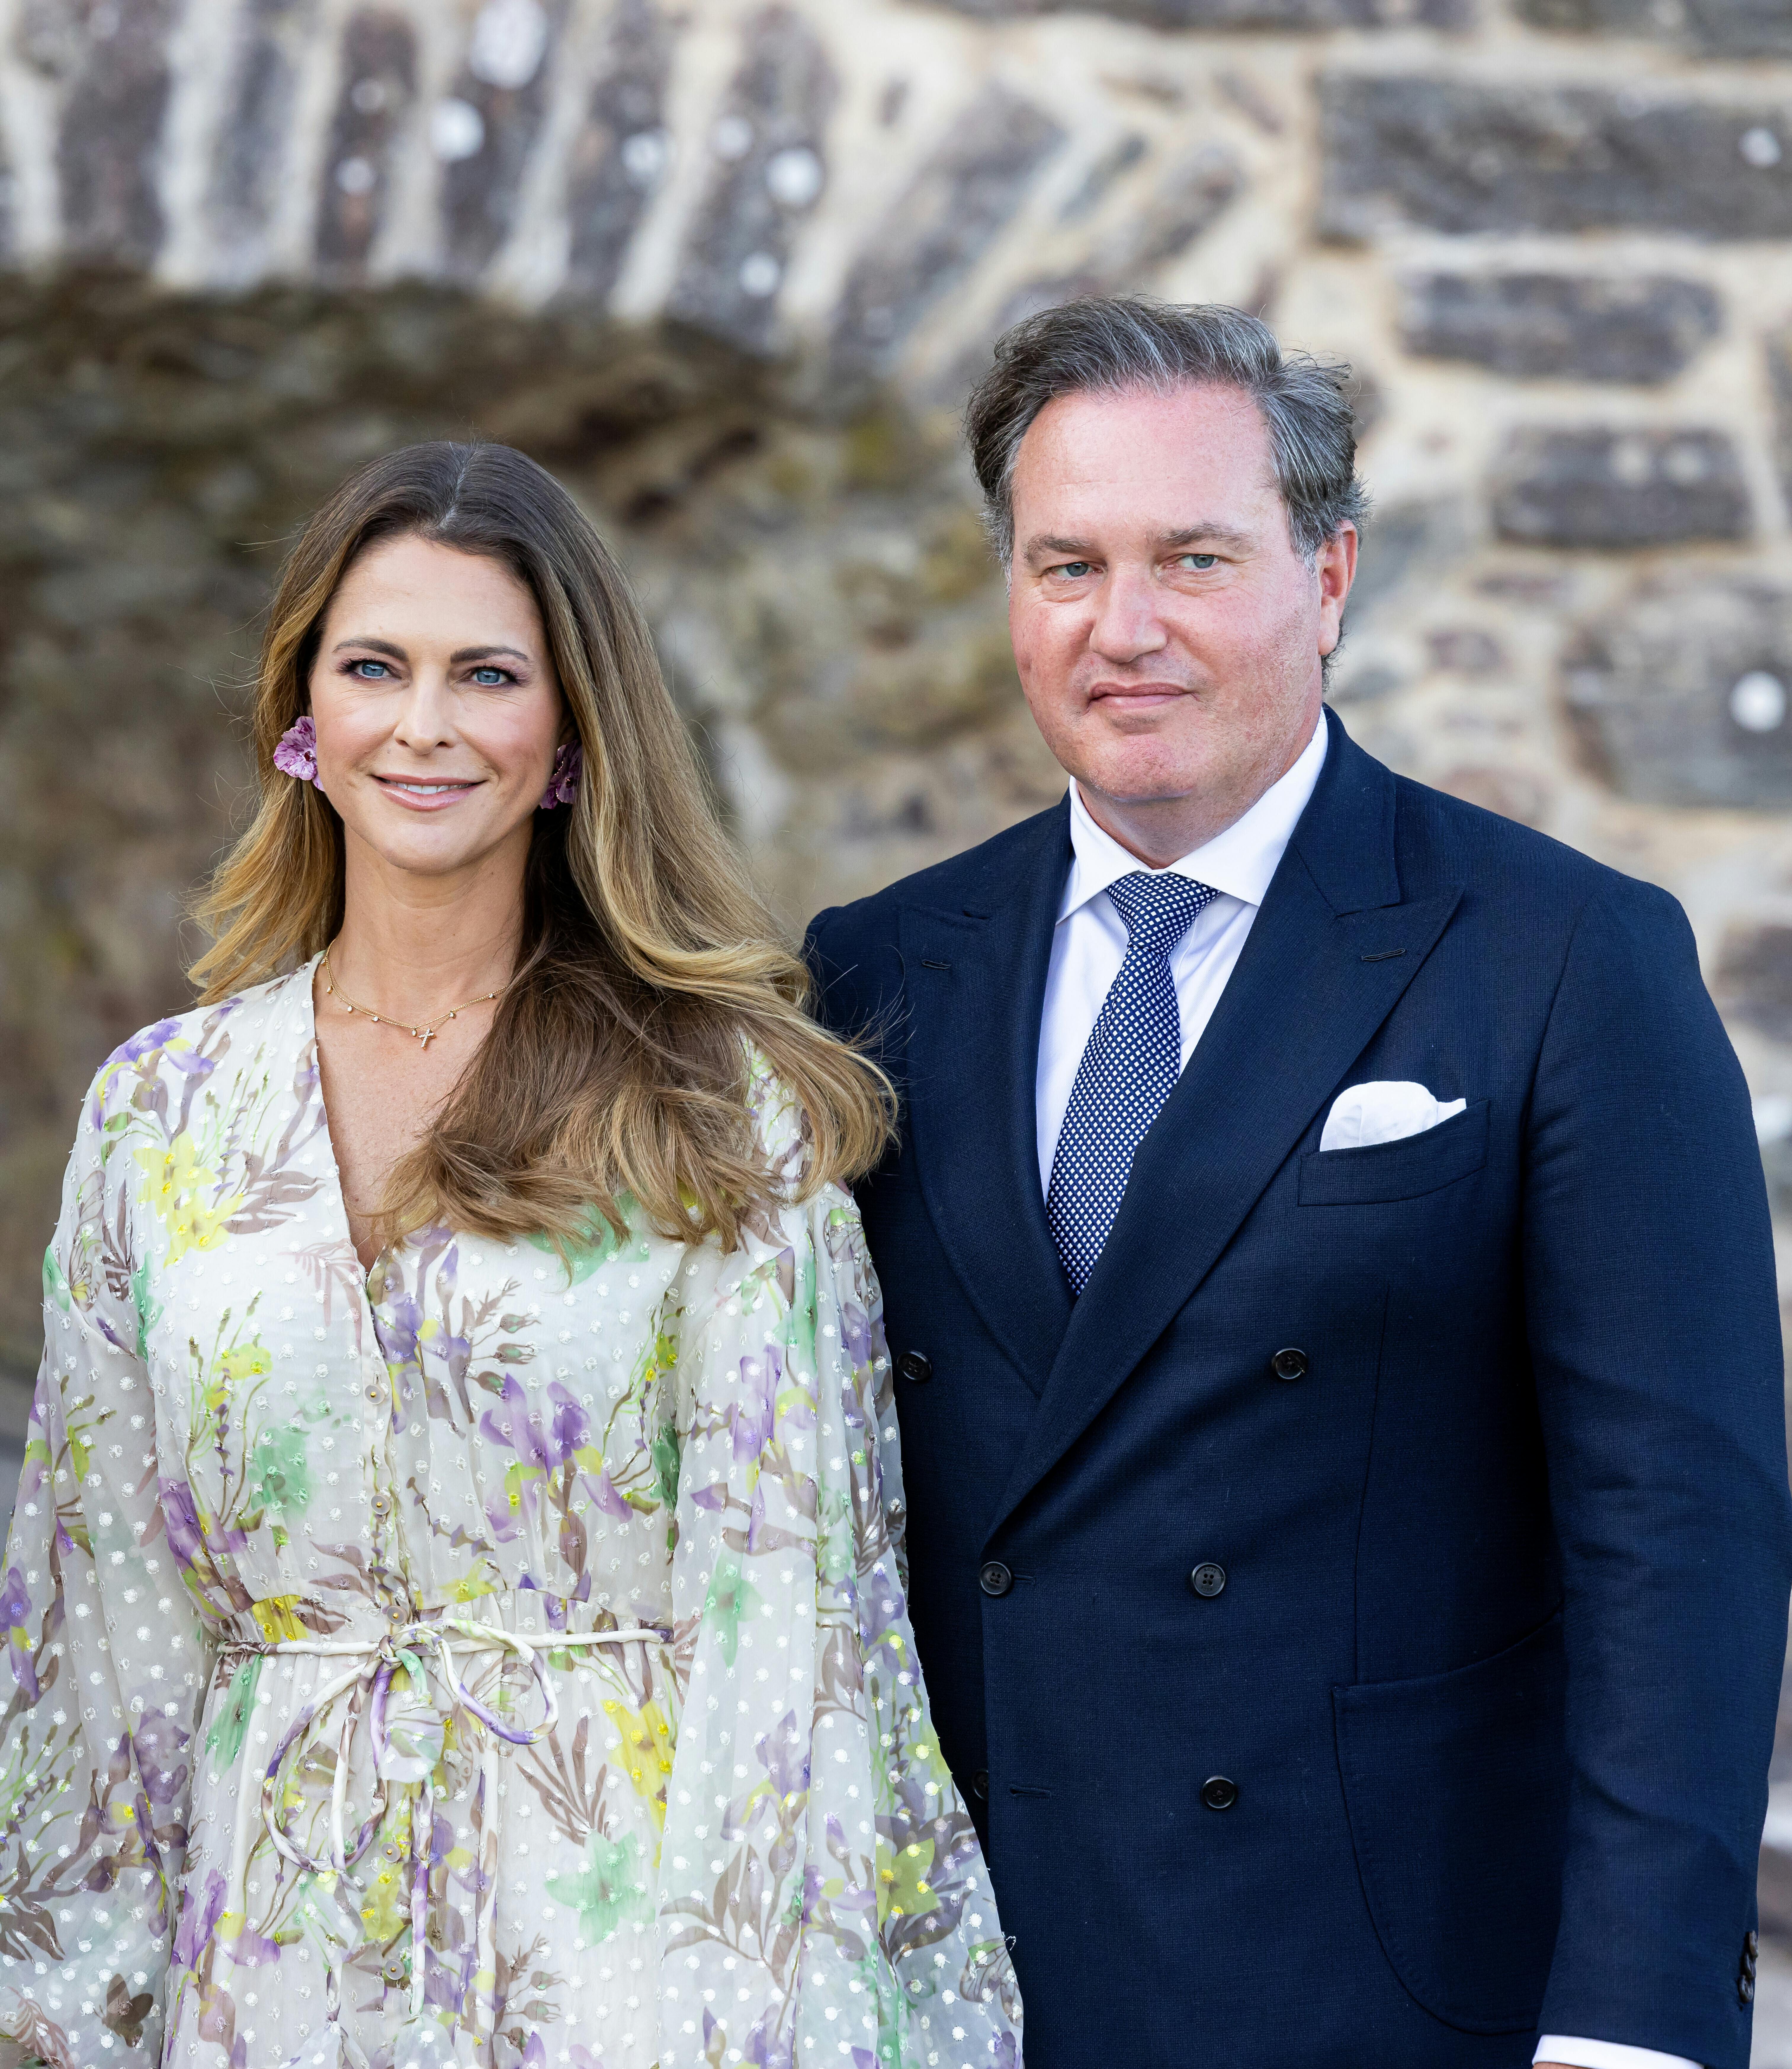 BORGHOLM, SWEDEN - JULY 14: King Carl Gustaf, Queen Silvia, Crown Princes Victoria, Prince Daniel, Princess Estelle, Prince OScar, Prince Carl Philip , Princess Sofia, Princess Madeleine of Sweden and Chris OâNeill attend the birthday celebration of the Crown Princess at Solliden and Borgholm Slot on July 14, 2023 in Borgholm, Sweden. Photo by: Patrick van Katwijk/picture-alliance/dpa/AP Images